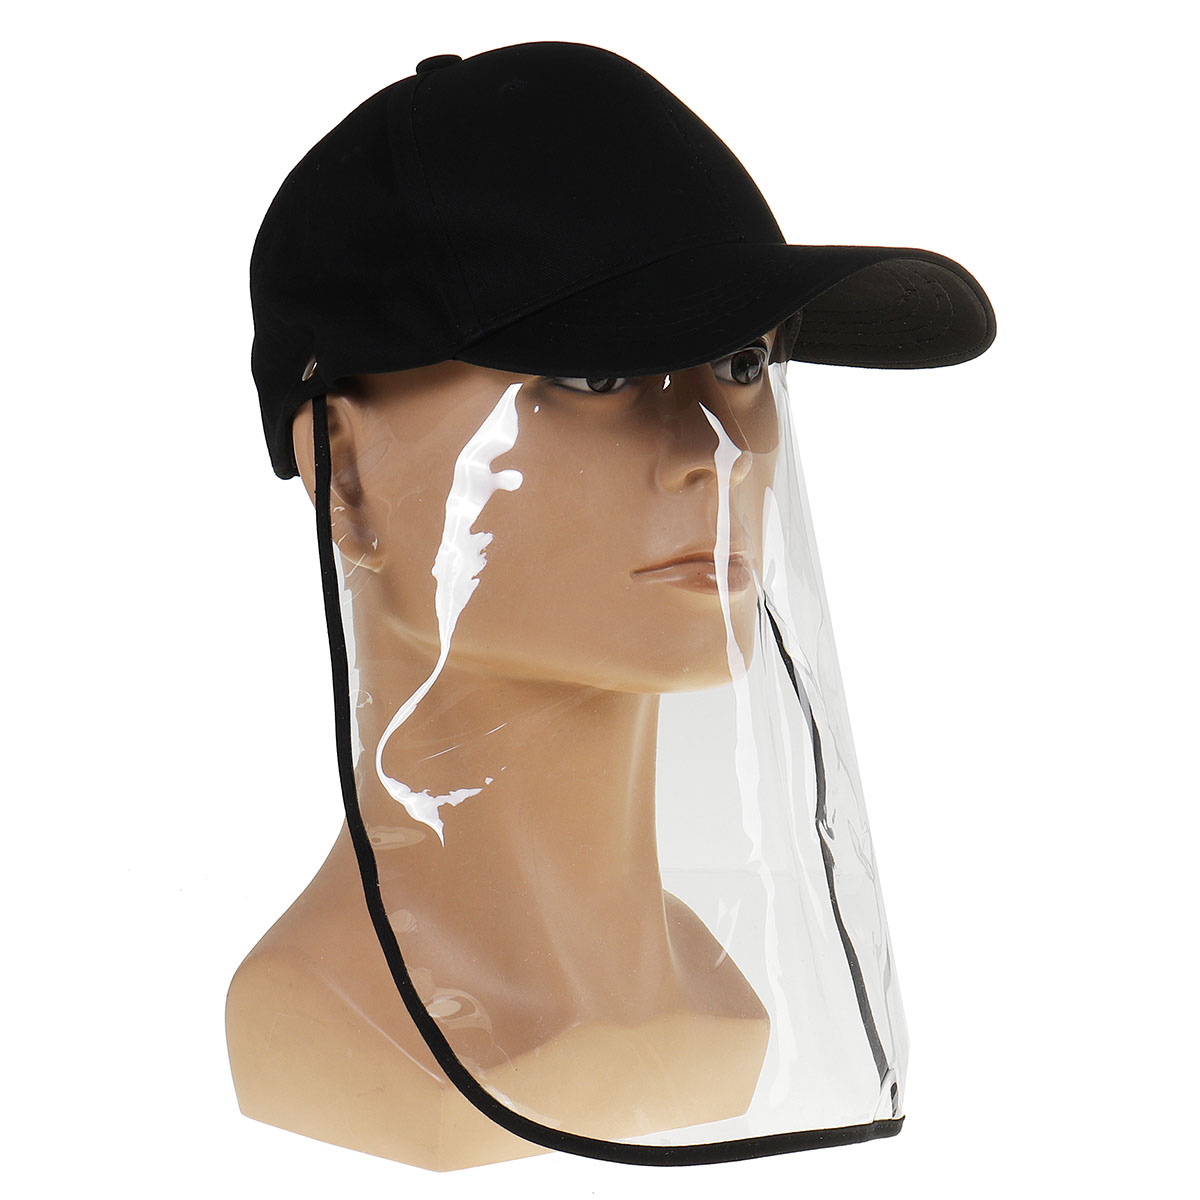 Clear-Full-Face-Hat-Waterproof-Cover-Mask-Cap-Shield-Protective-Anti-spitting-1659895-5